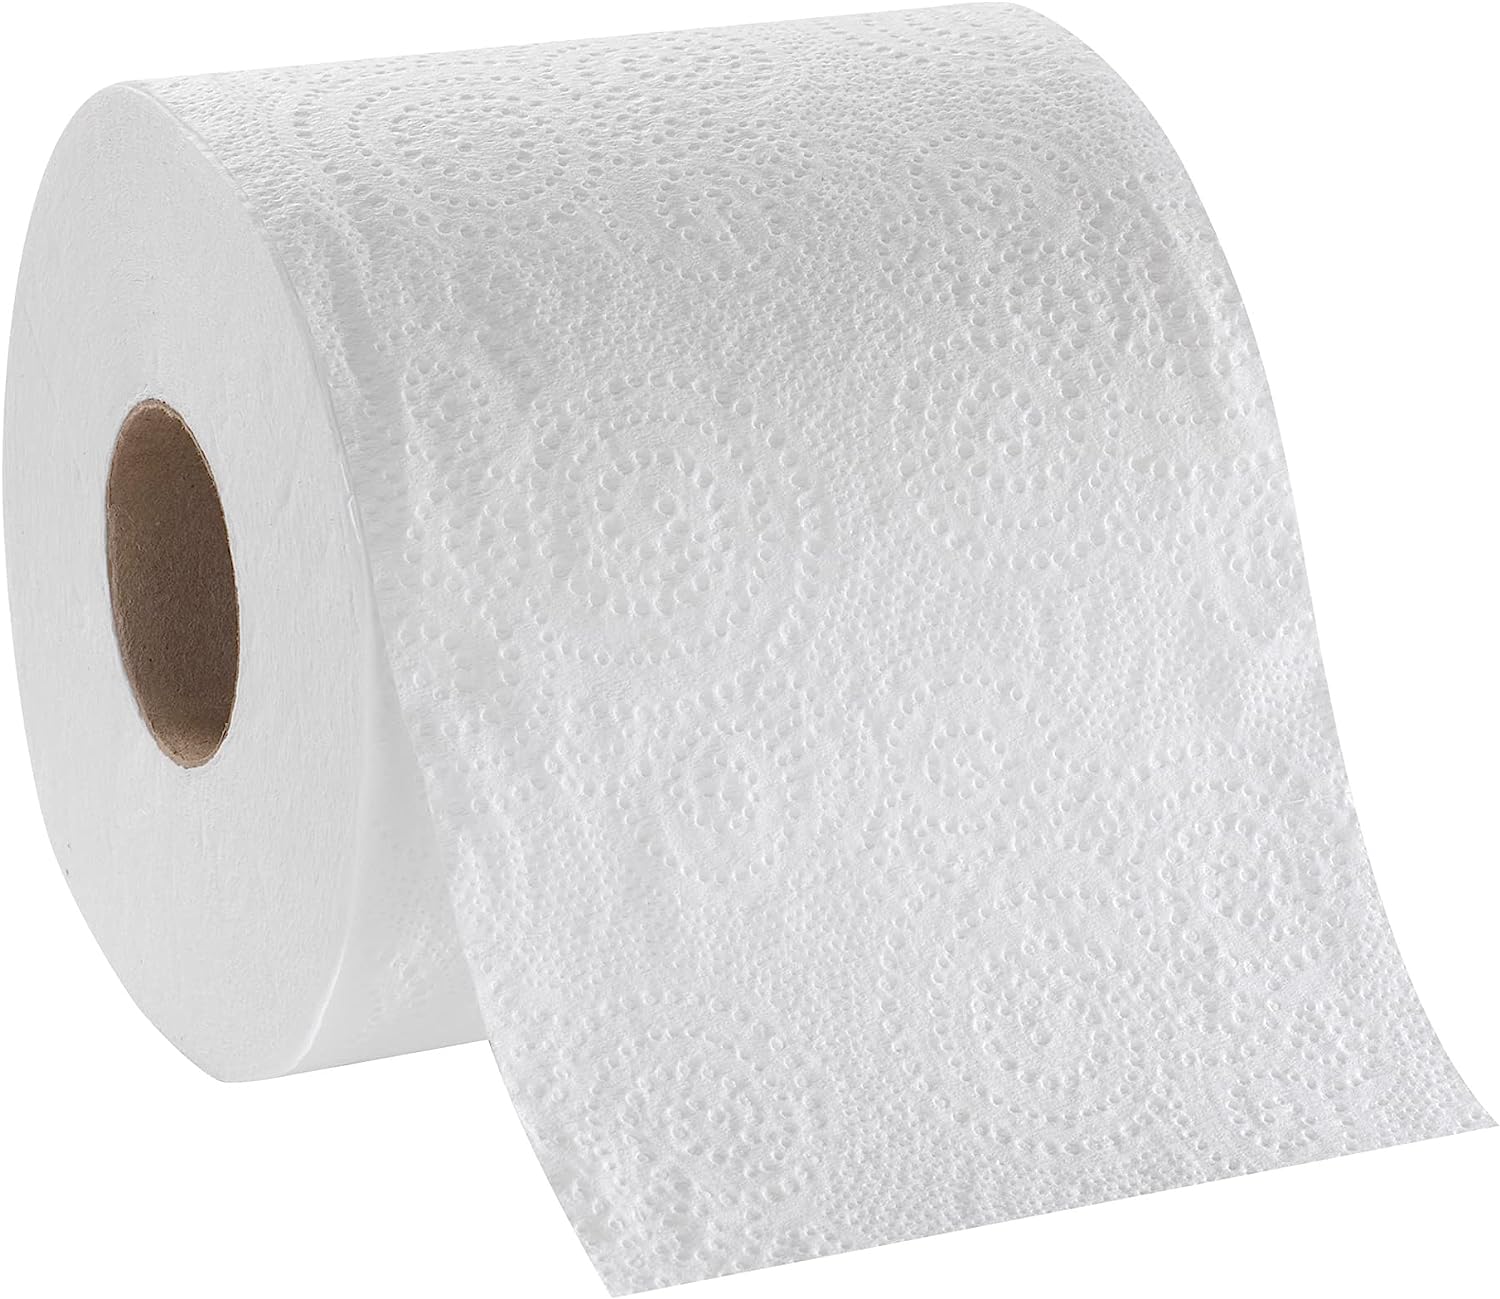 Georgia-Pacific Angel Soft Ultra Professional Series 2-Ply Embossed Toilet  Paper by GP PRO 1632014 400 Sheets Per Roll 20 Rolls Per Convenience Case | 